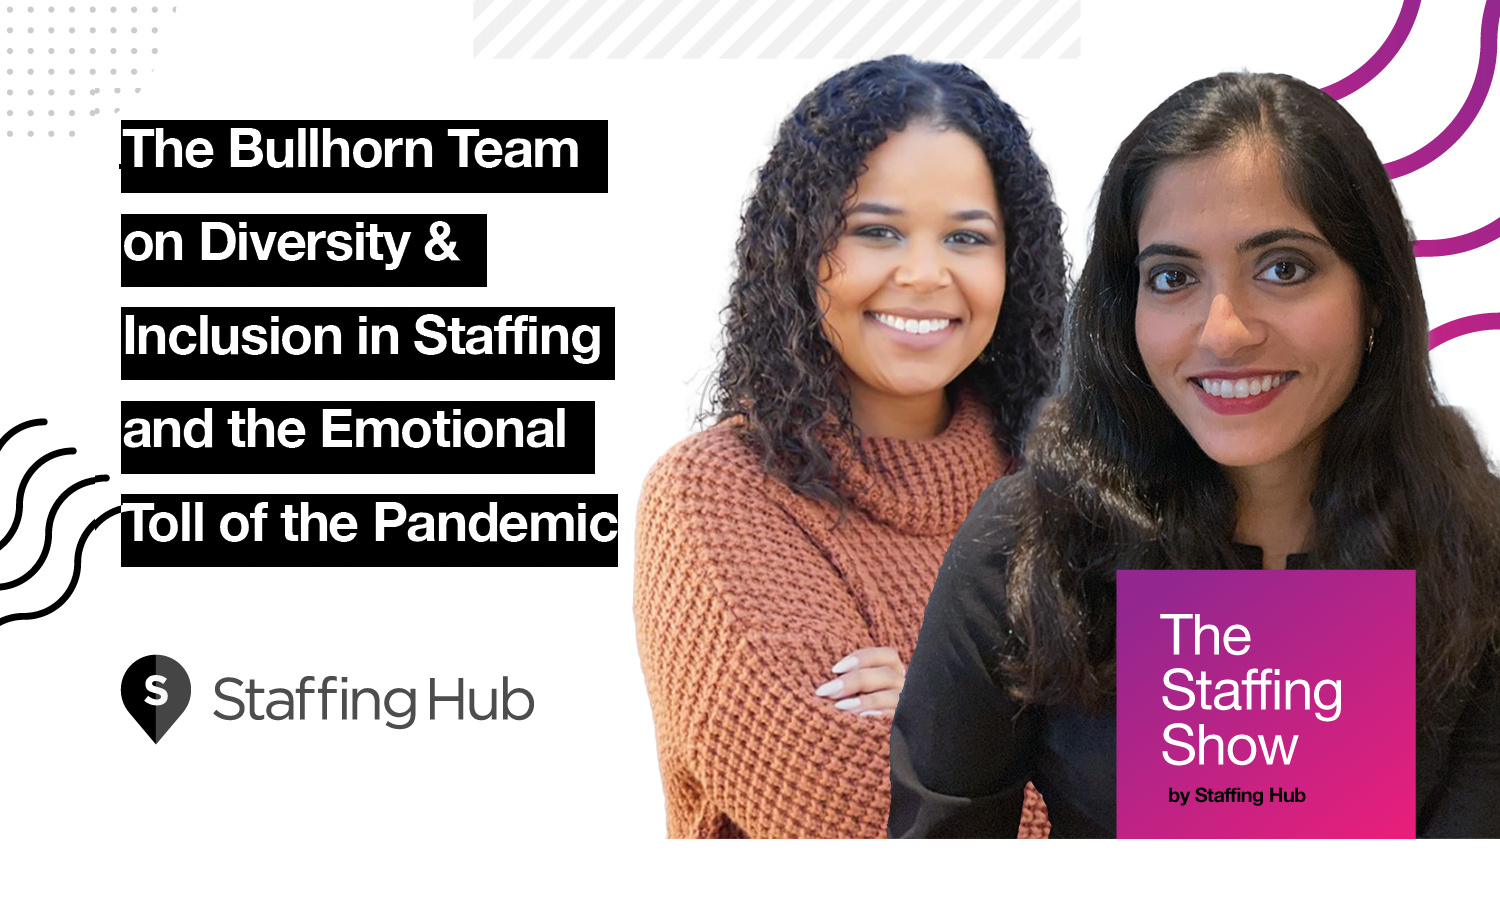 The Bullhorn Team on Diversity & Inclusion in Staffing and the Emotional Toll of the Pandemic